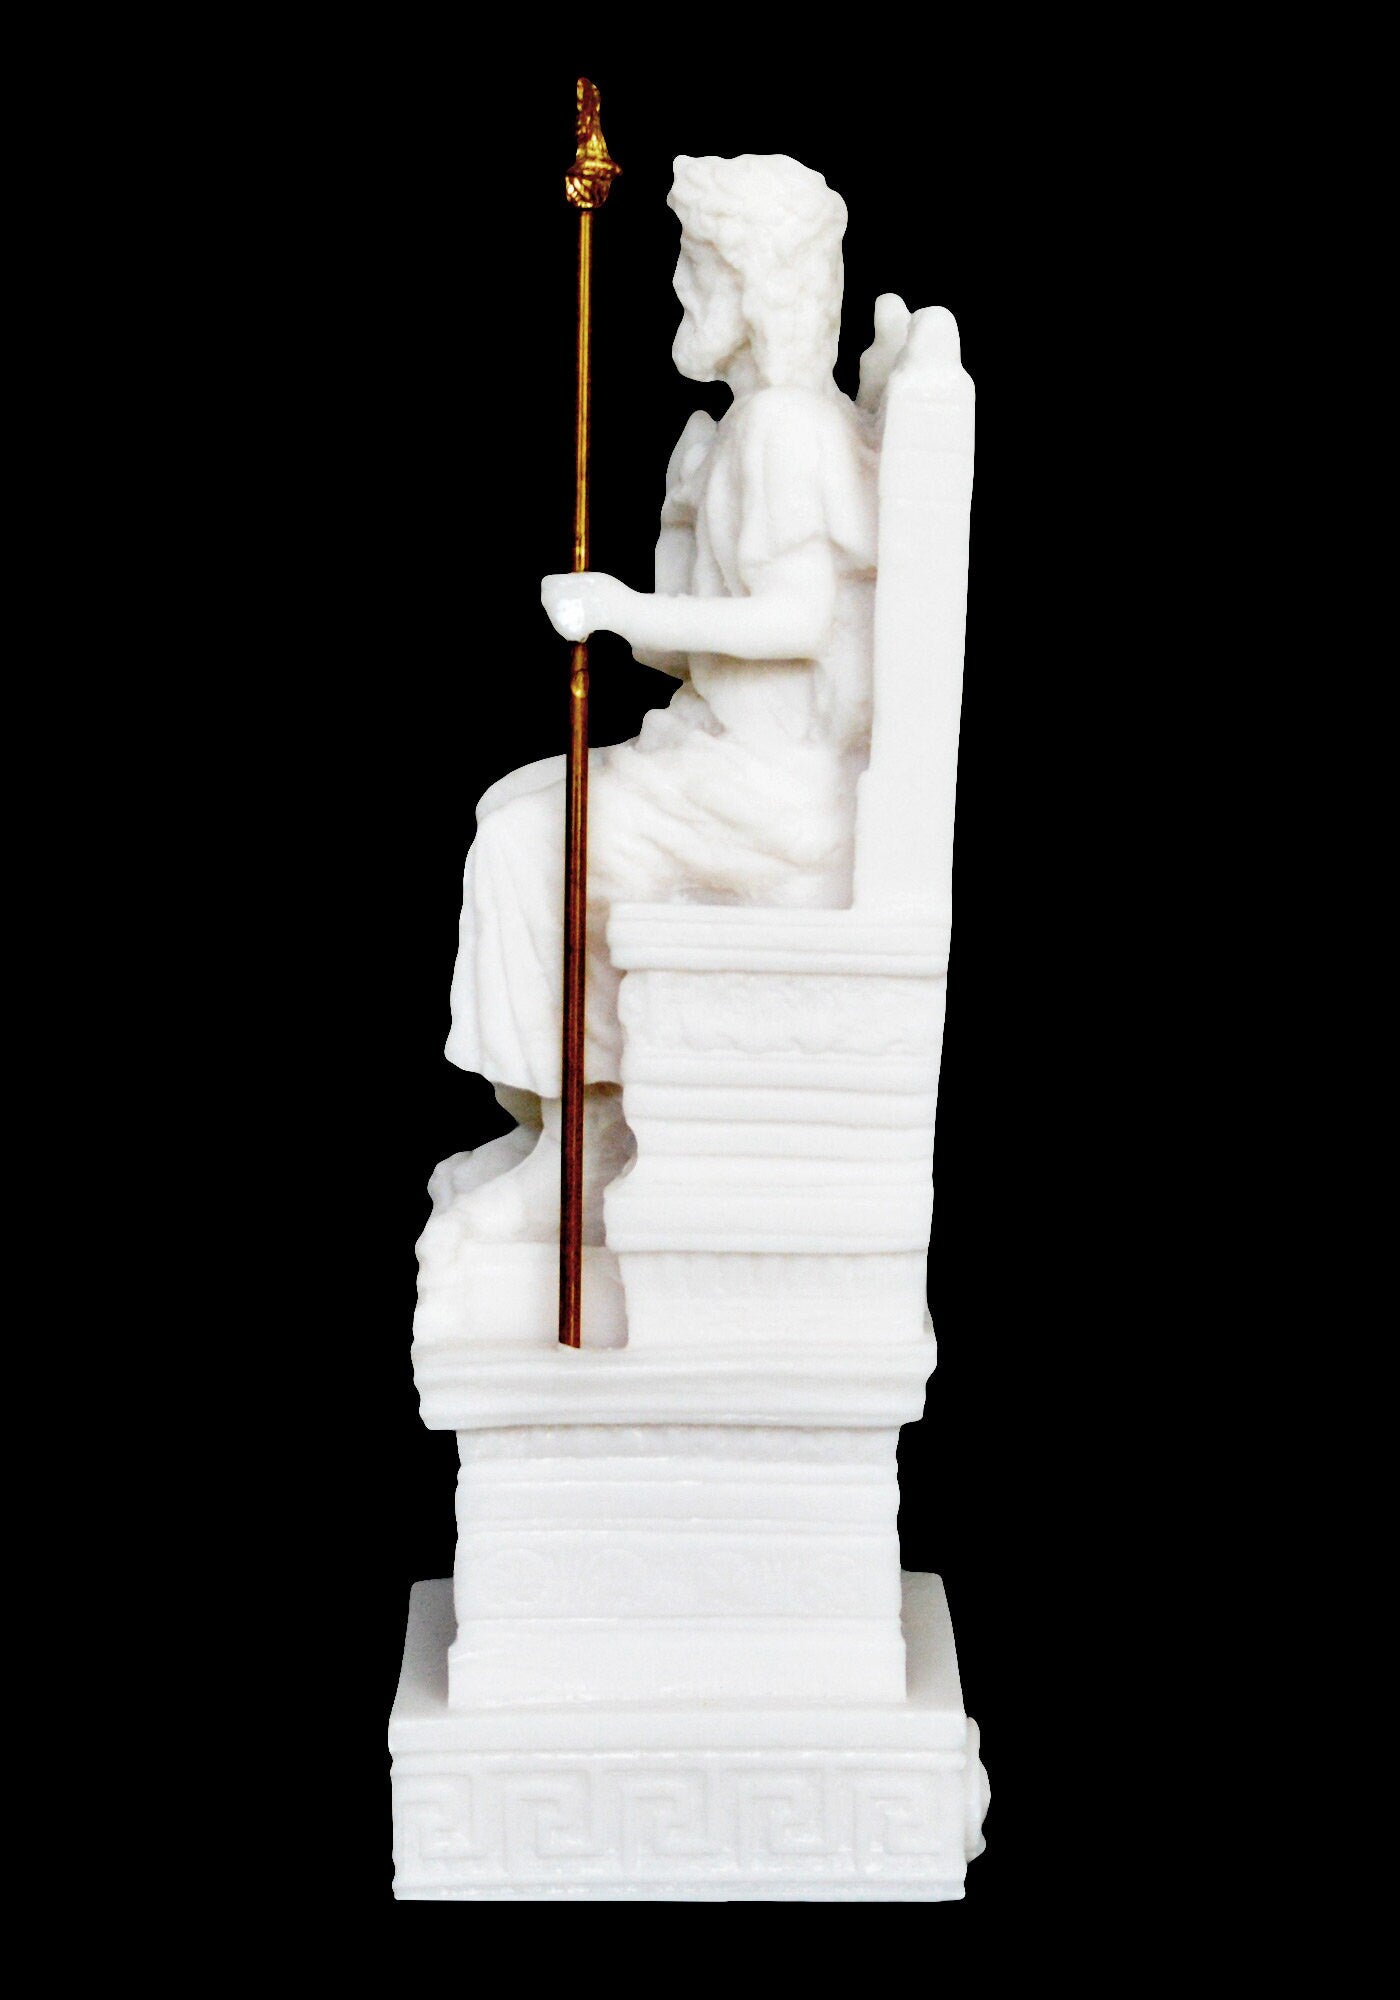 Zeus Jupiter - Greek Roman God of the Sky, Law and Order, Destiny and Fate - King of the Gods of Mount Olympus - Alabaster Statue